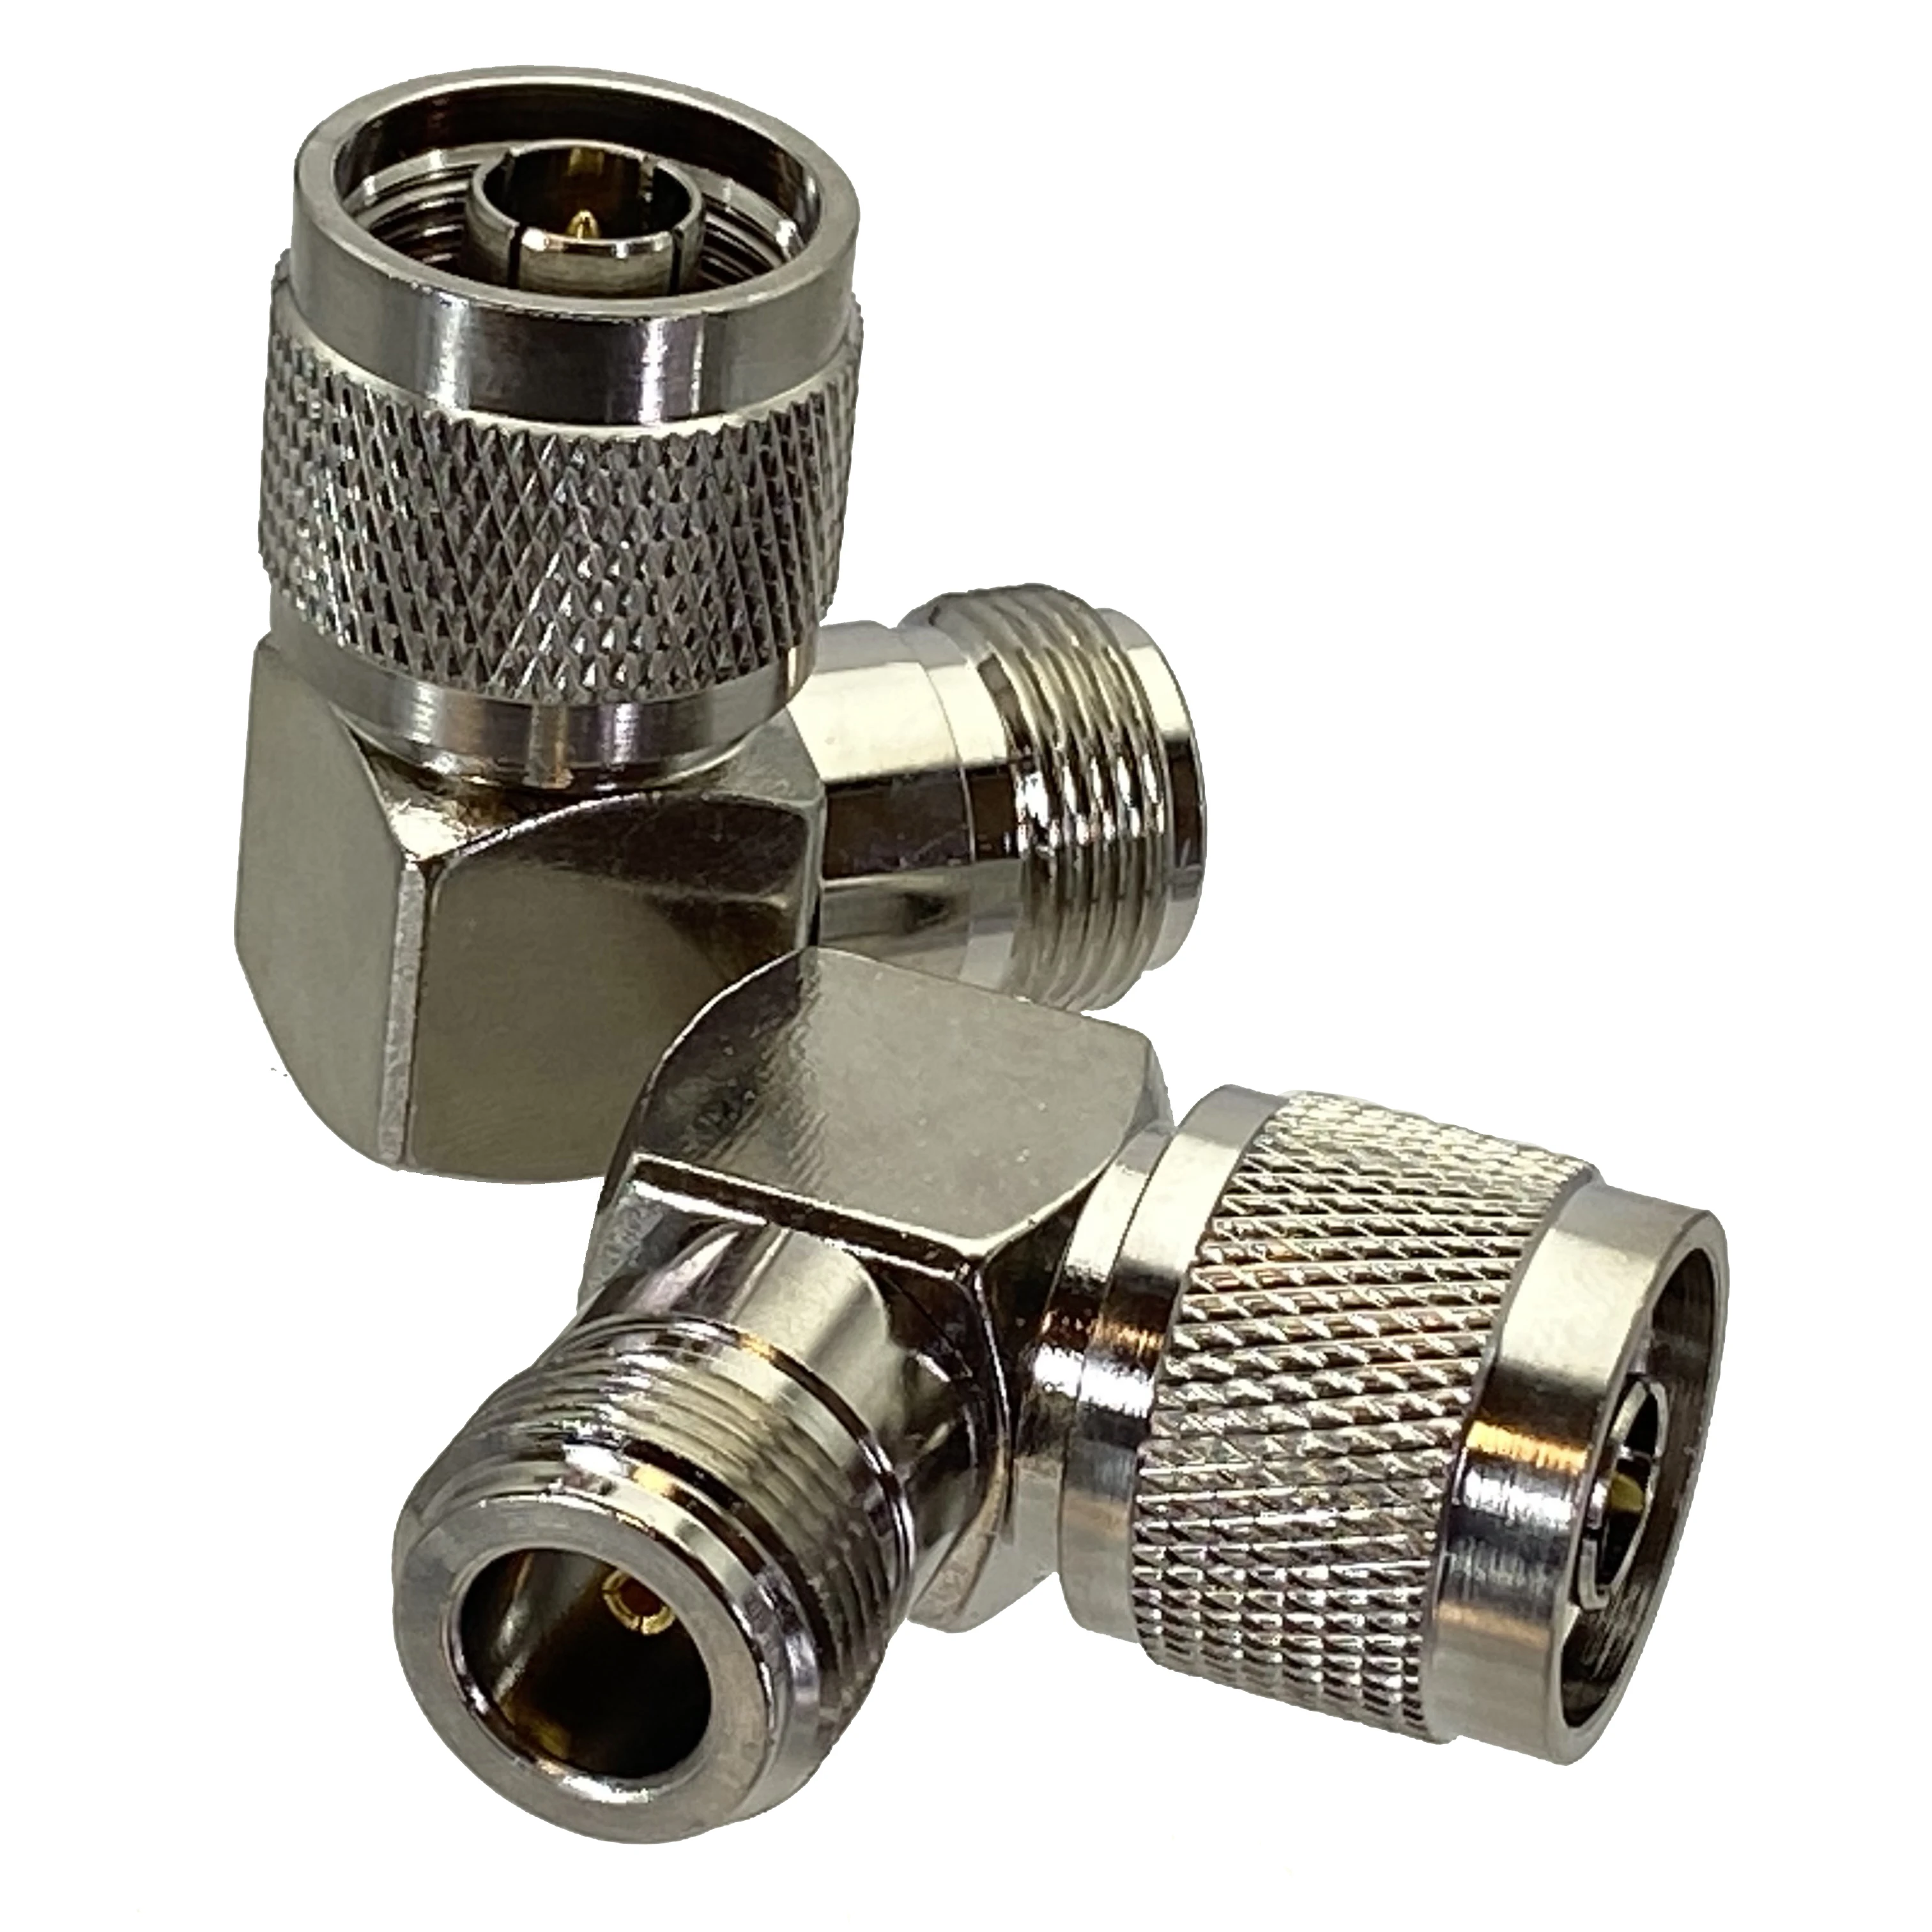 1pcs-n-male-plug-to-n-female-jack-right-angle-rf-adapter-connector-coaxial-high-quanlity-brass-50ohm